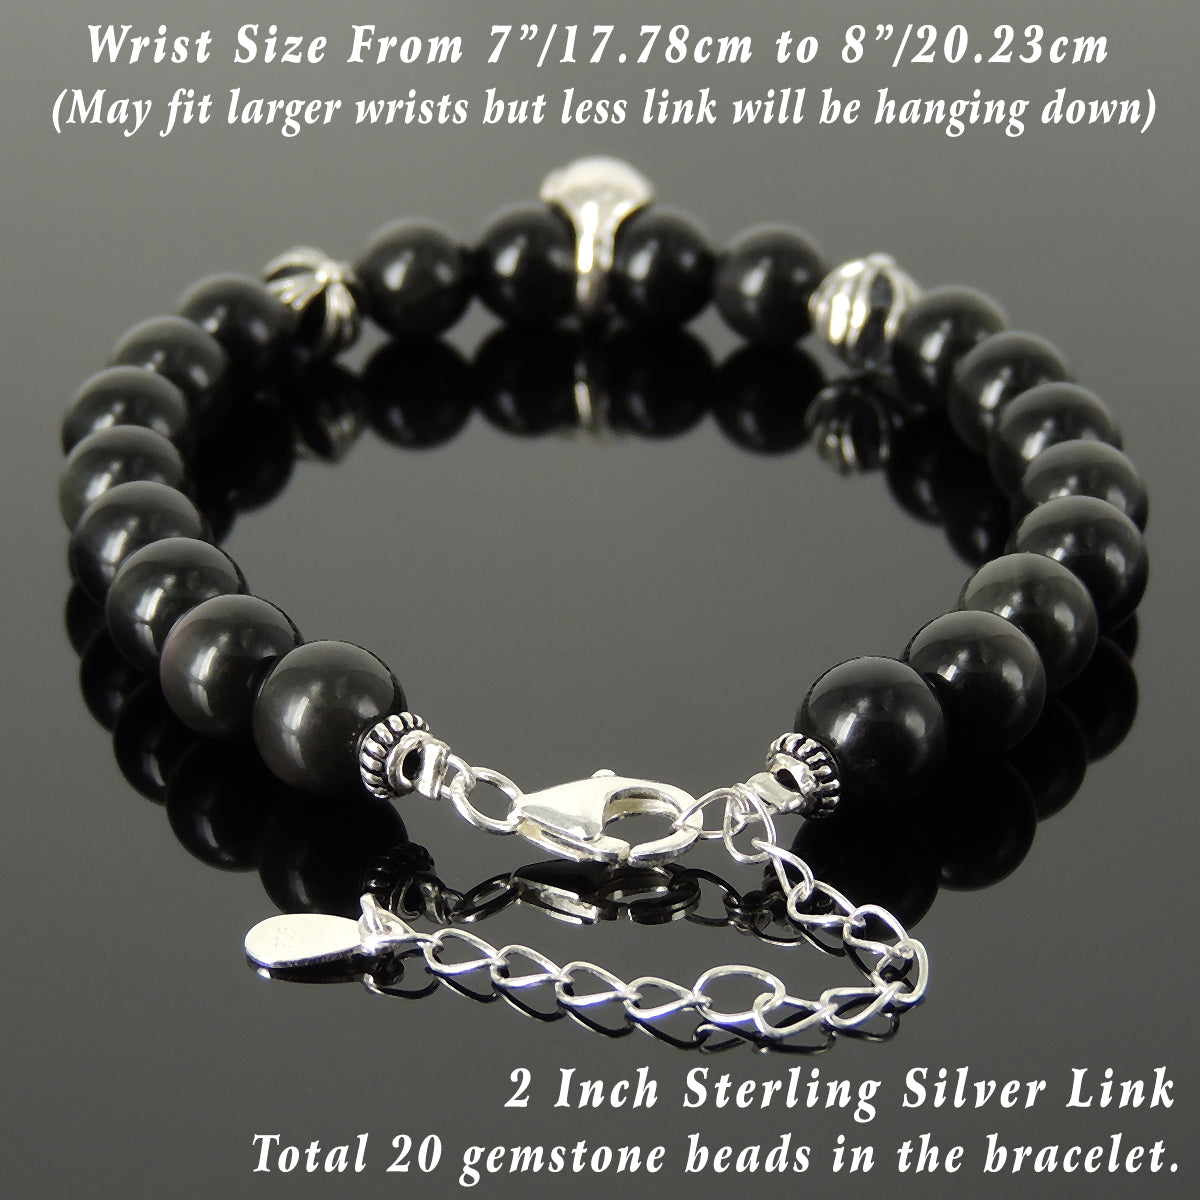 Handmade Spiritual Skull & Cross Clasp Bracelet with Healing 8mm Rainbow Black Obsidian Gemstones with Genuine S925 Sterling Silver Parts - BR1467